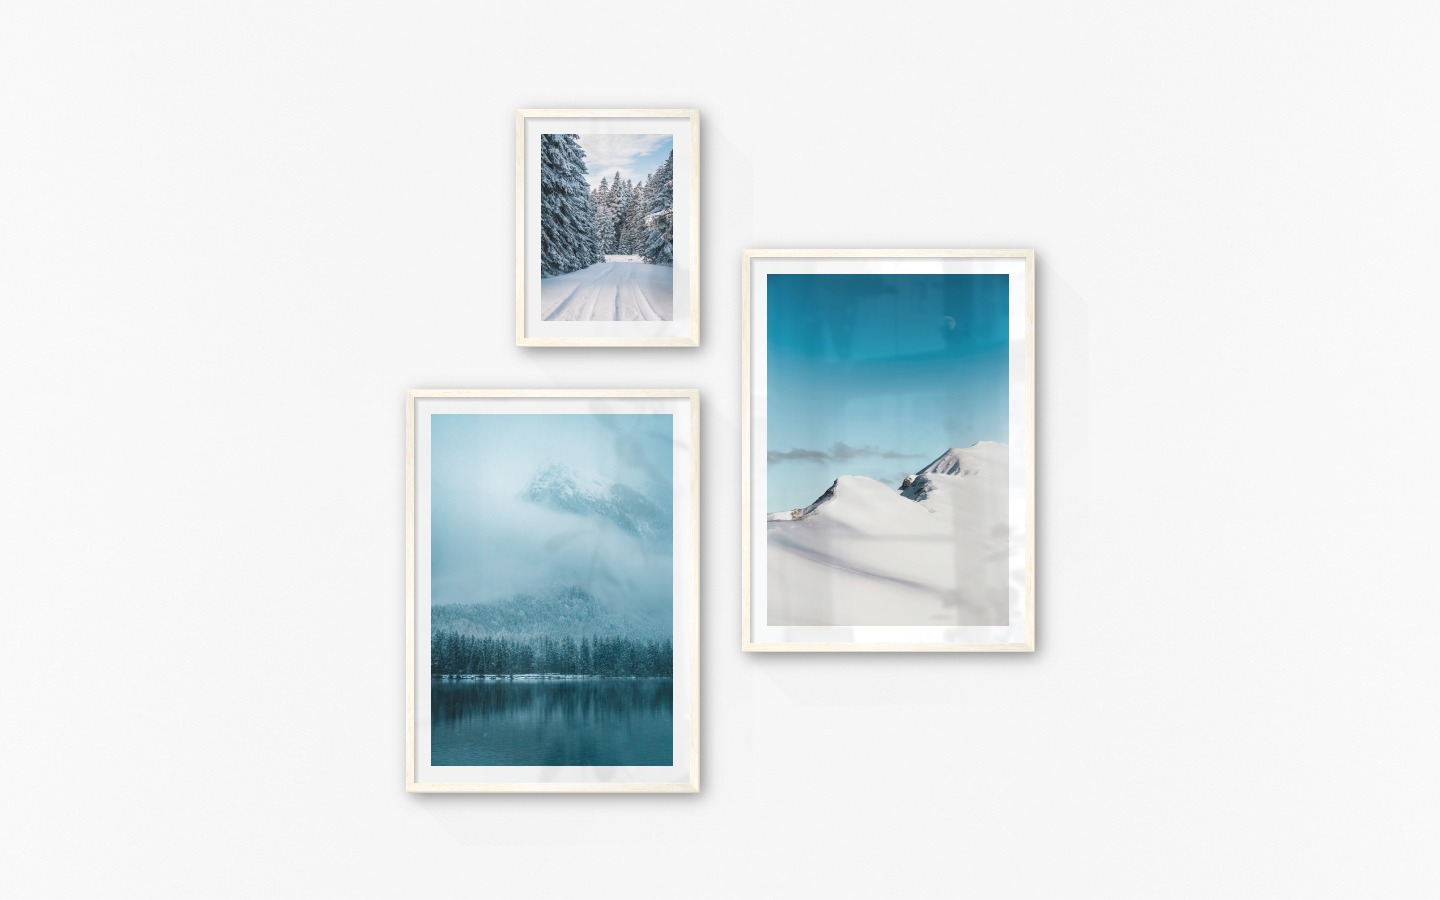 Gallery wall with picture frames in light wood in sizes 30x40 and 50x70 with prints "Snowy road", "Lake, mountains and forest" and "Snowy mountain peaks"